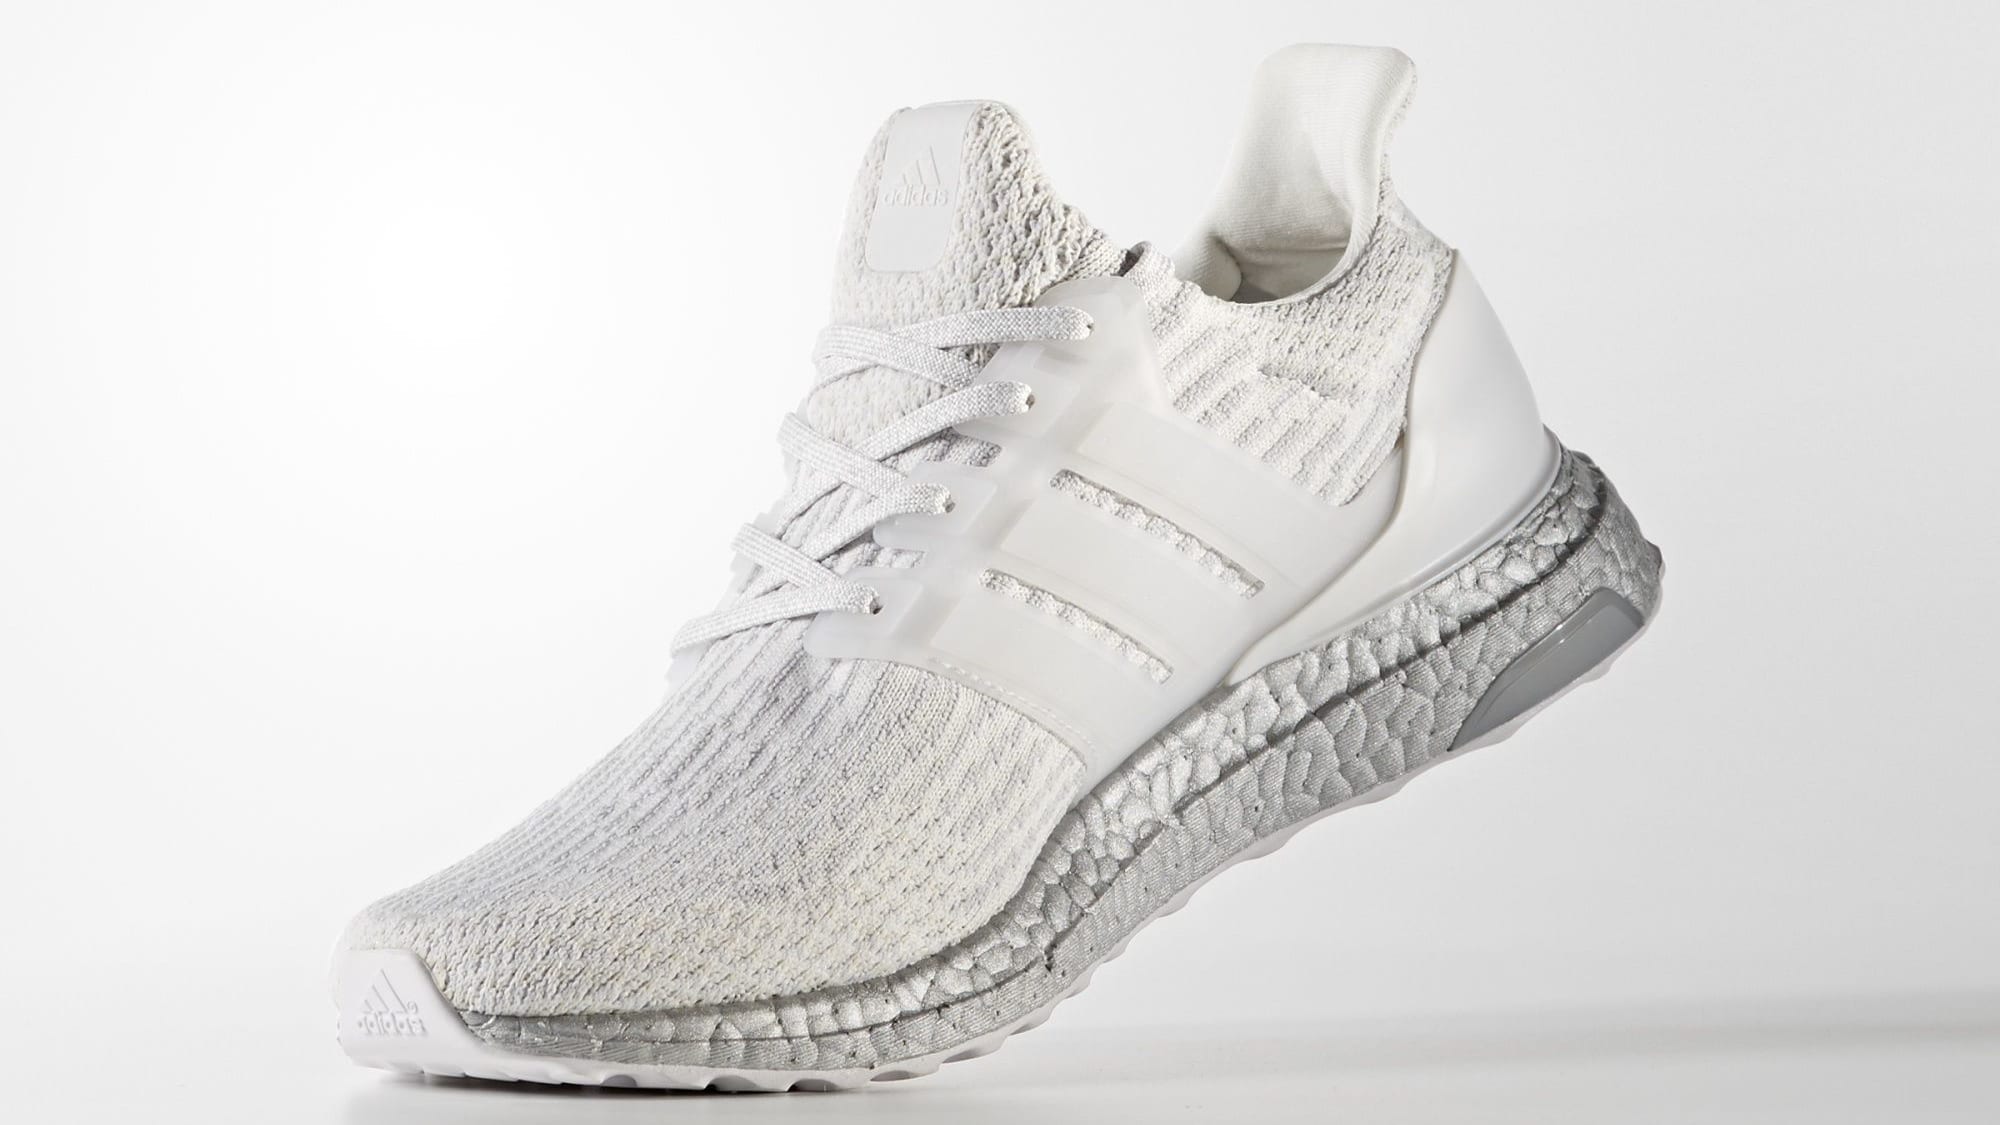 adidas Ultra Boost 3.0 "Crystal White"